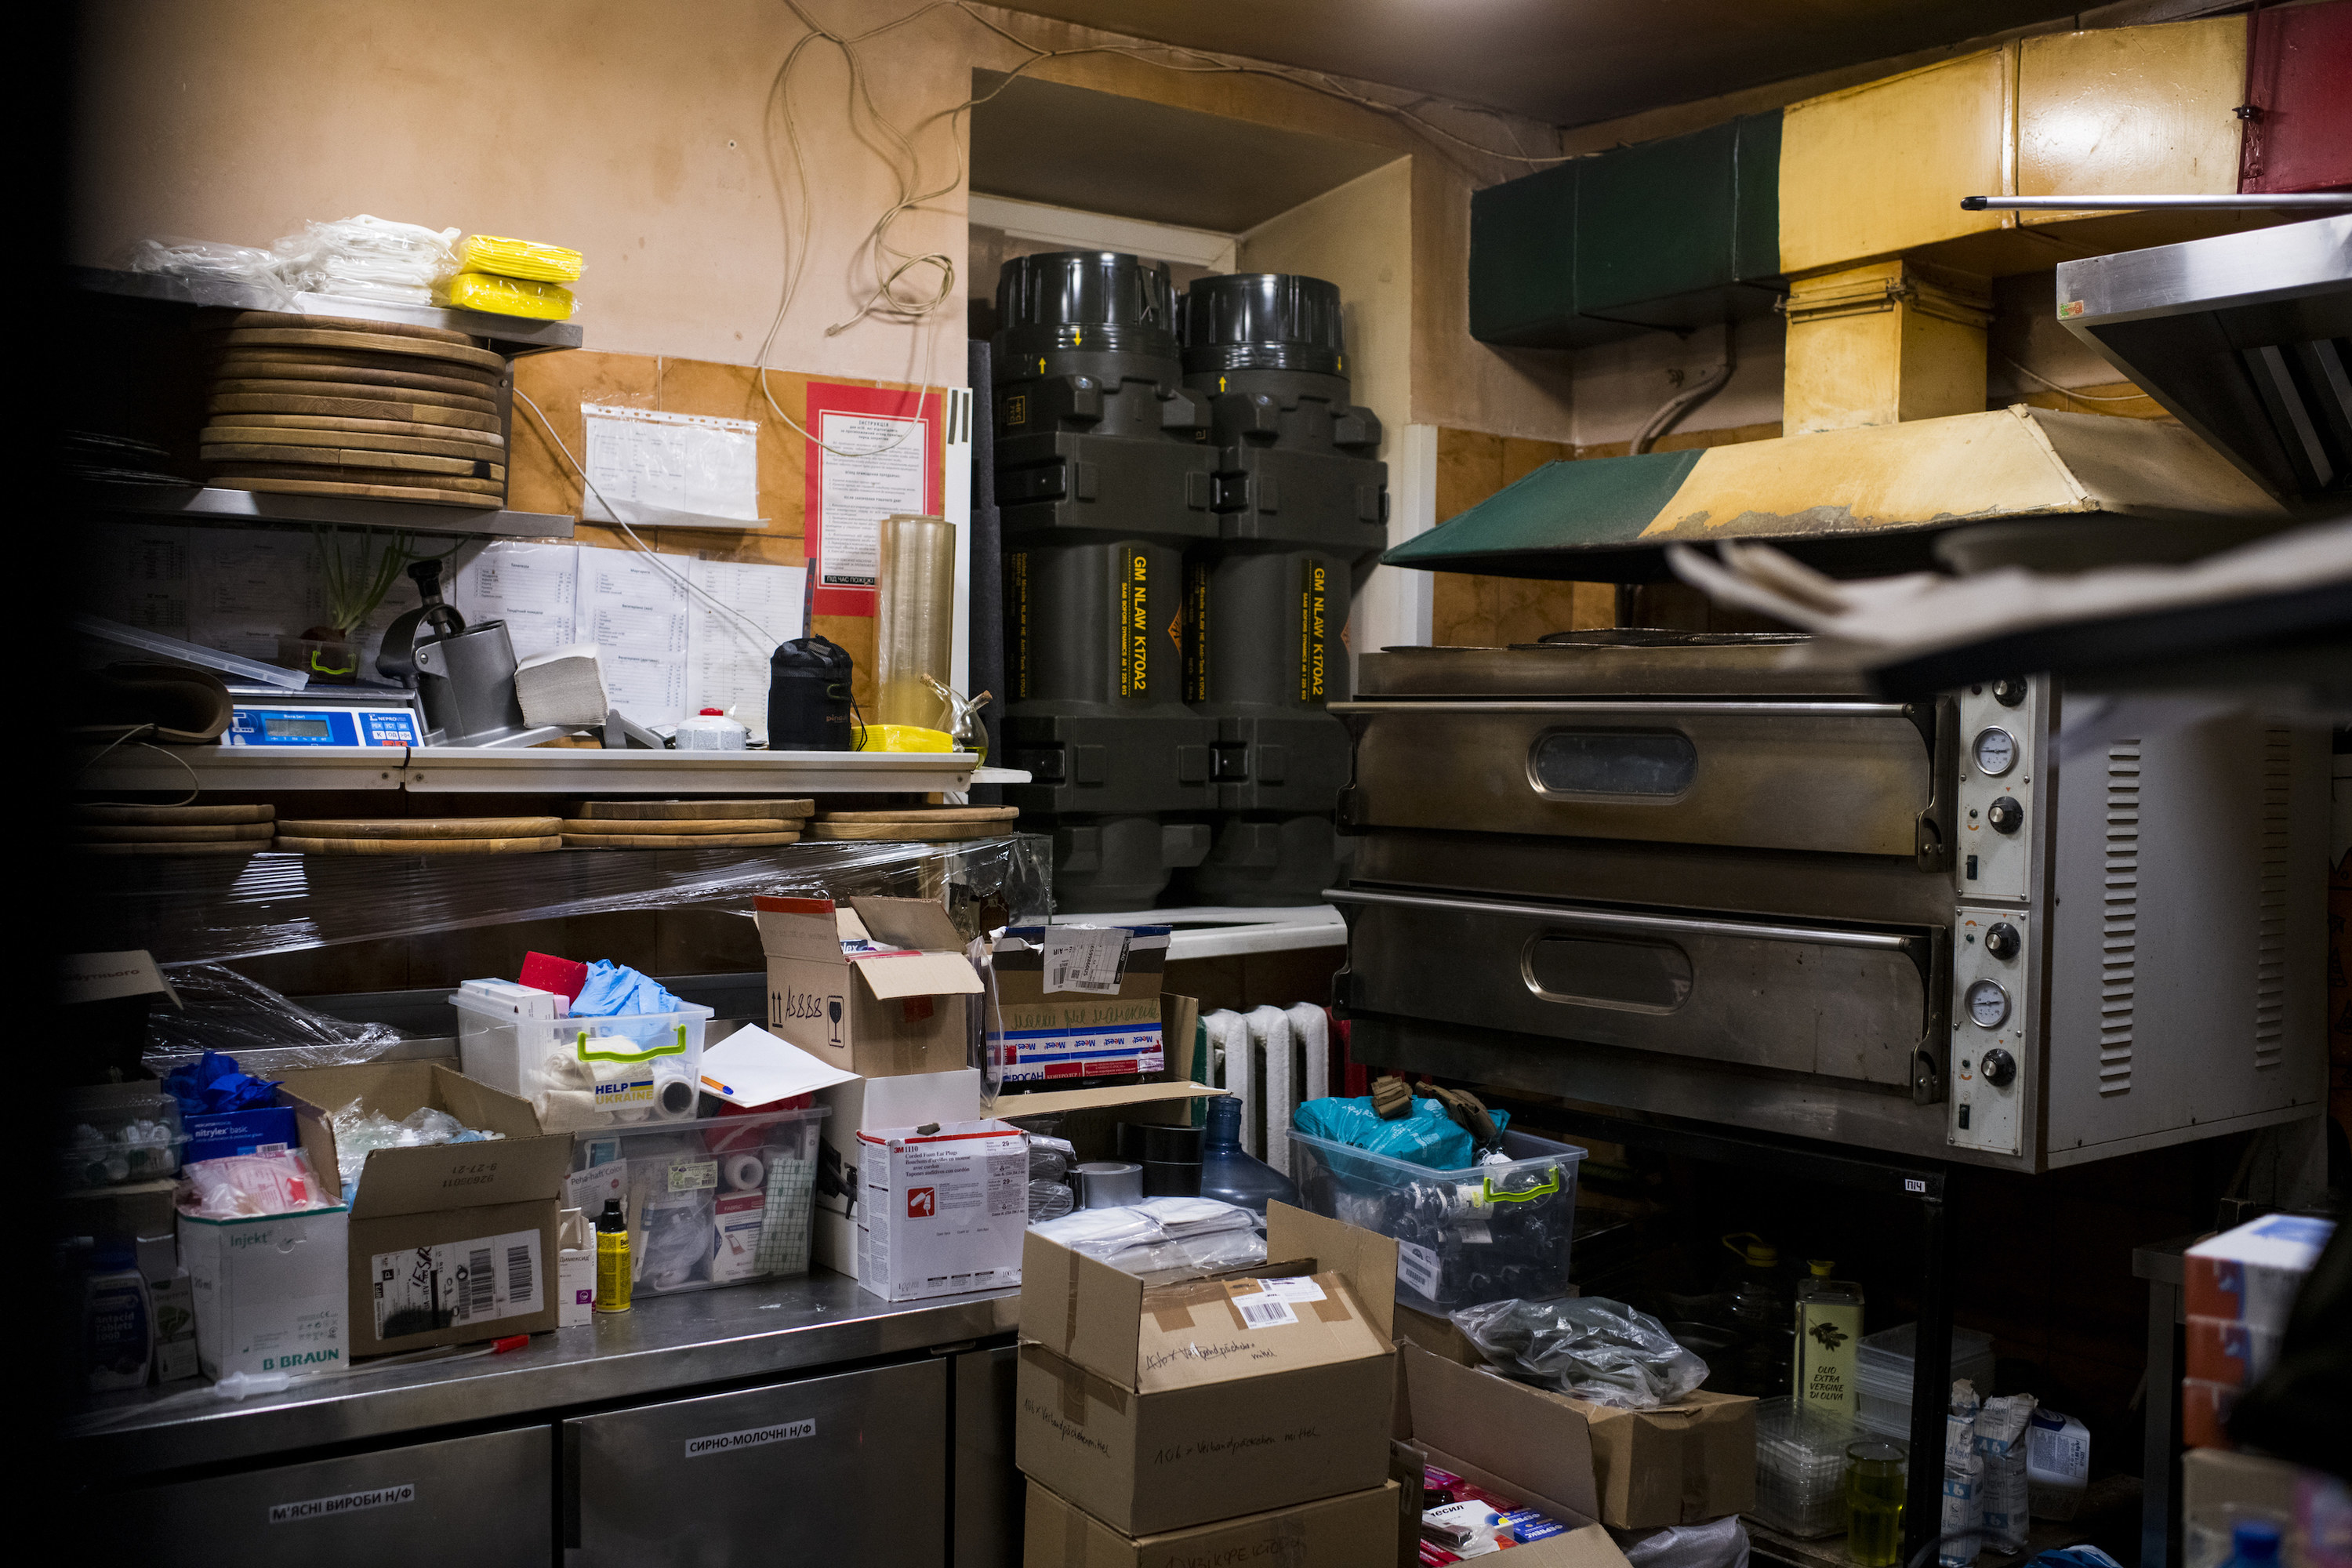 A crowded storage area showing an old pizza oven, shelves, boxes, and weapons against the wall